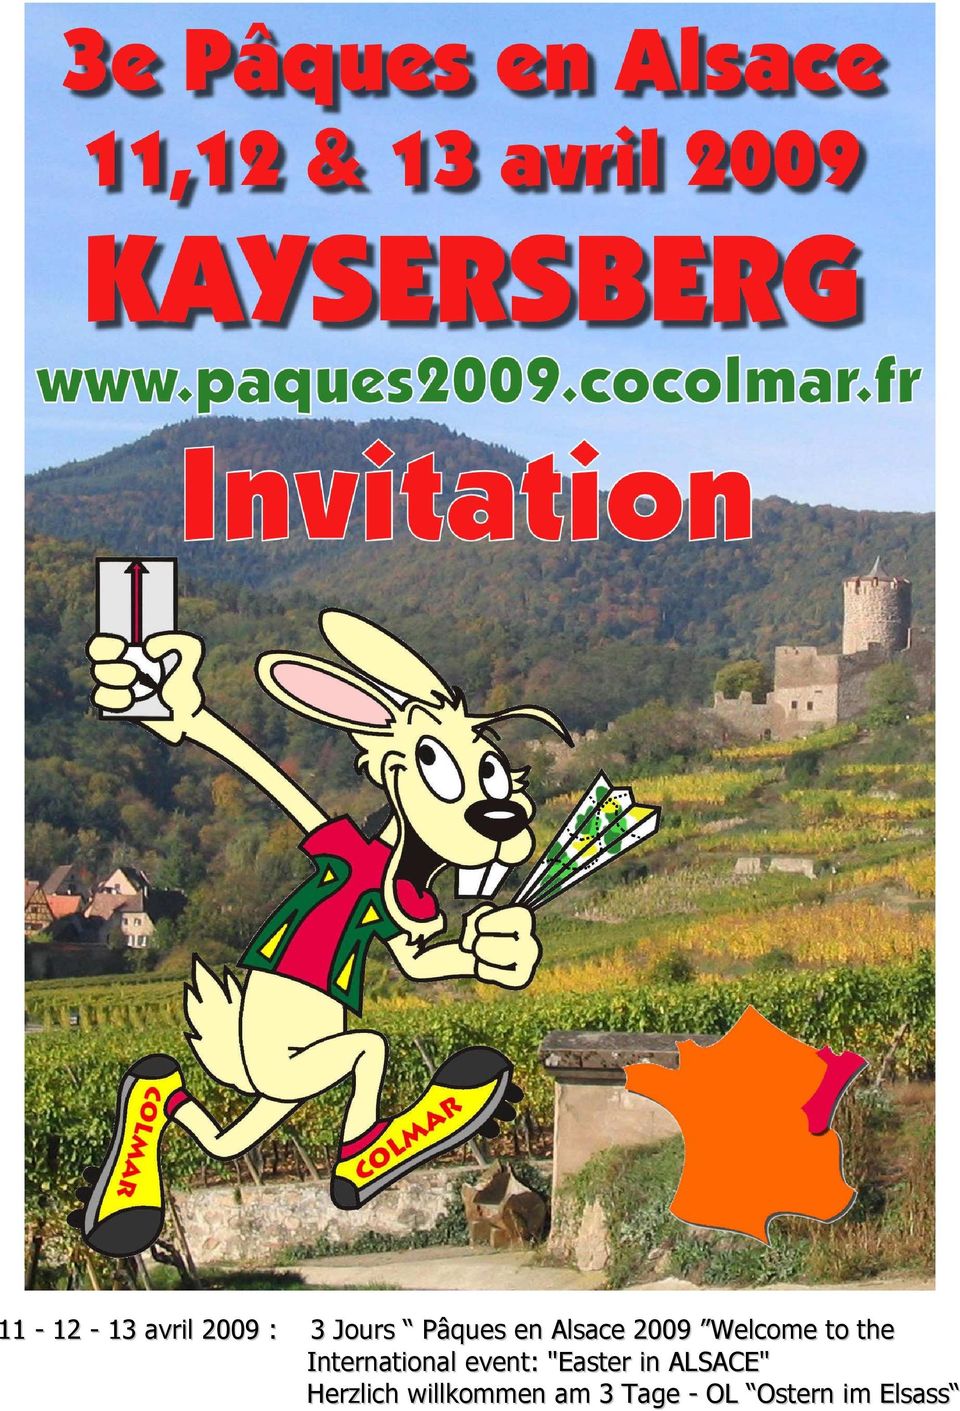 International event: "Easter in ALSACE"